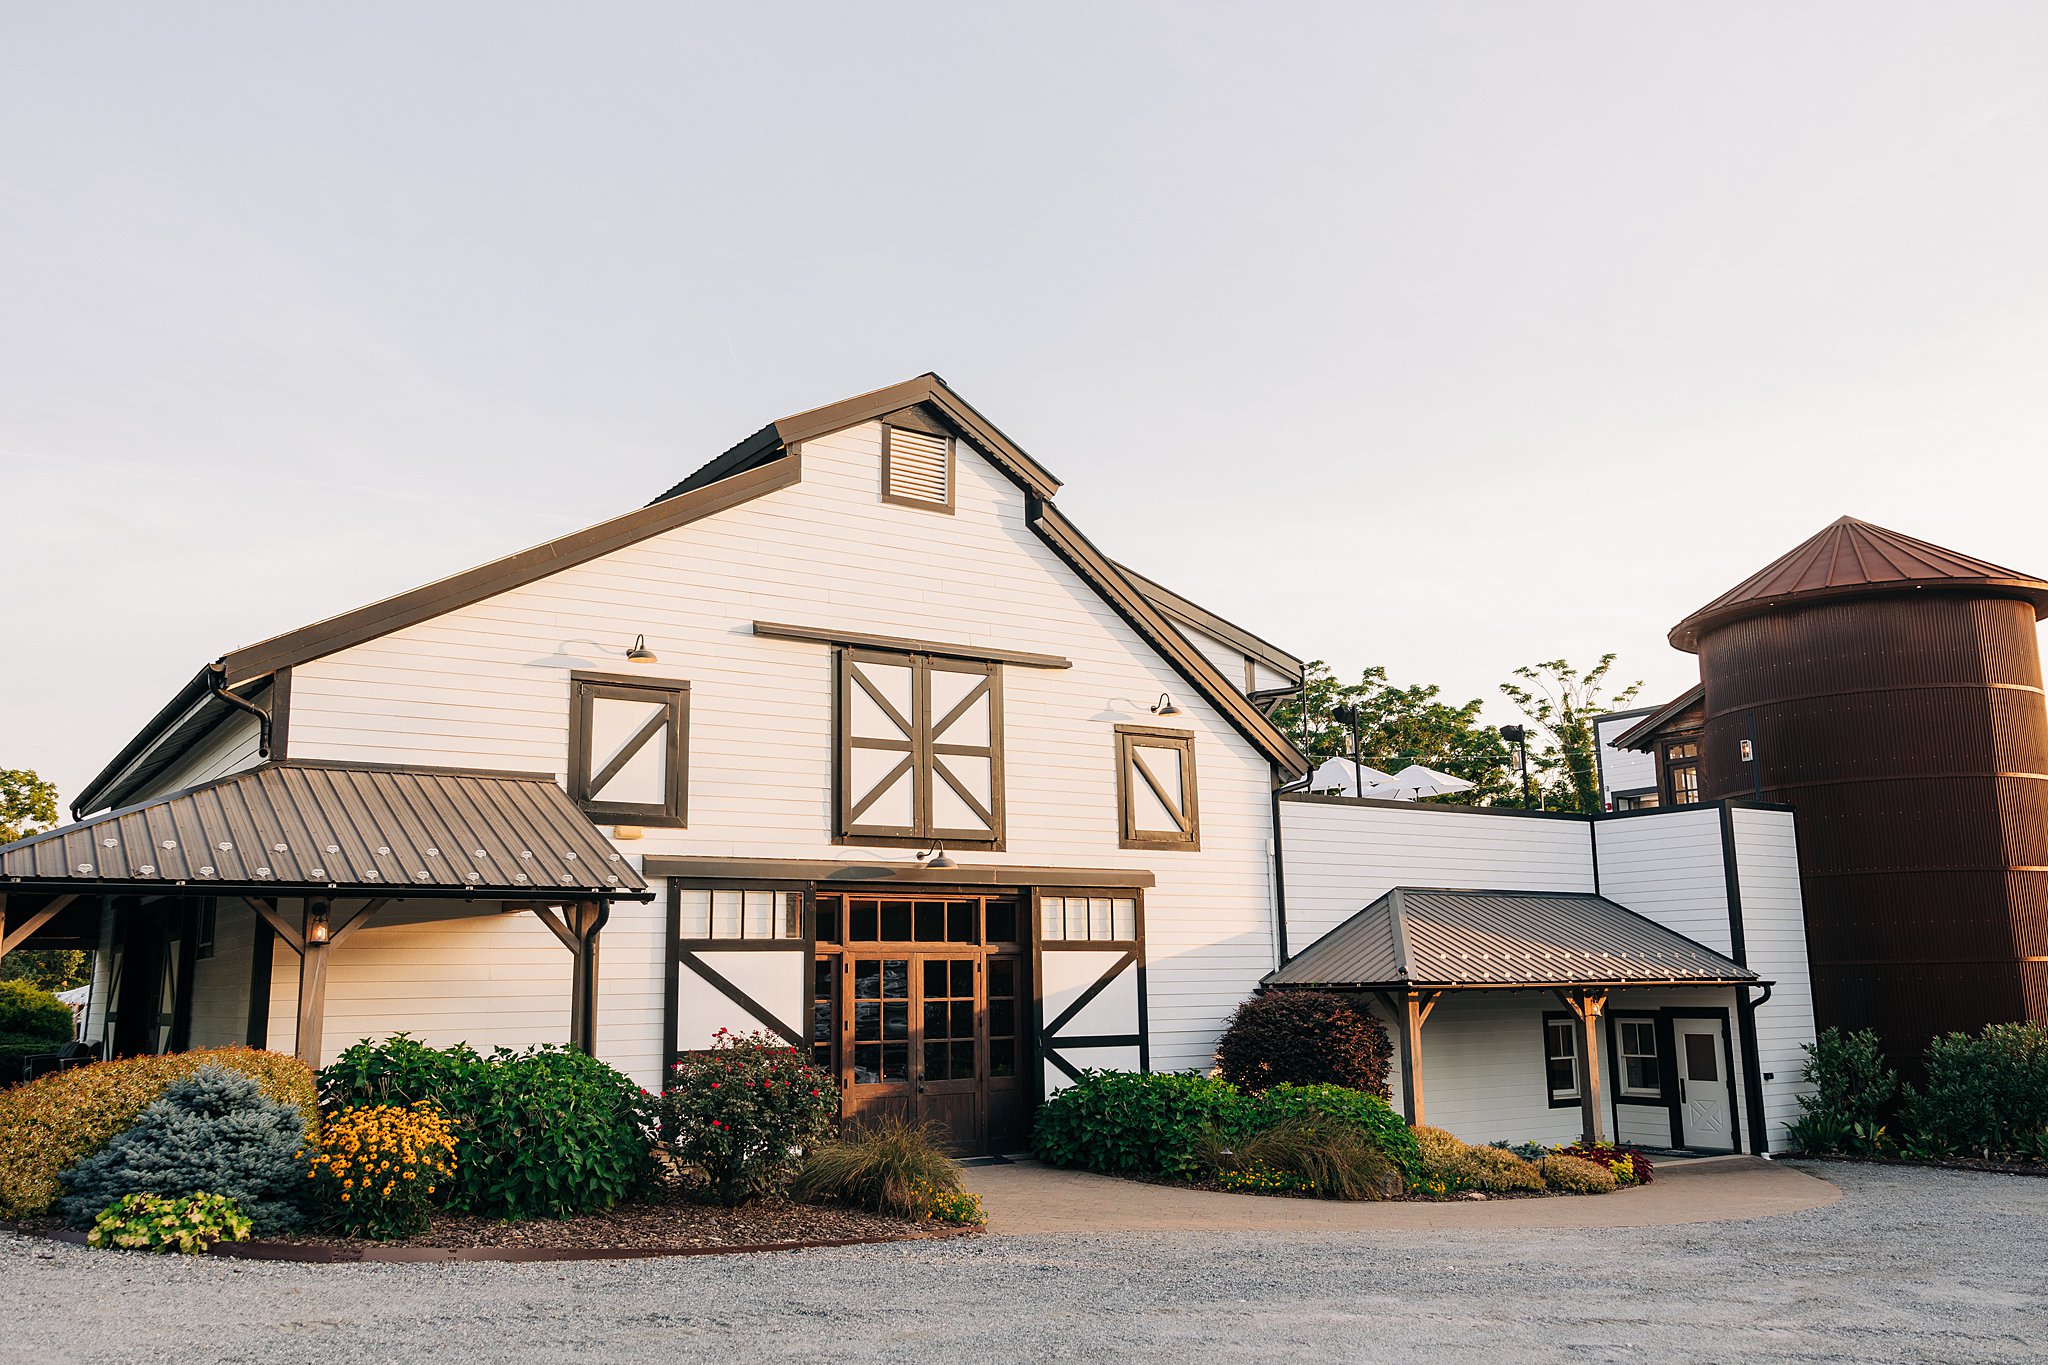 A view of the barn at the Summerfield Farms wedding venue